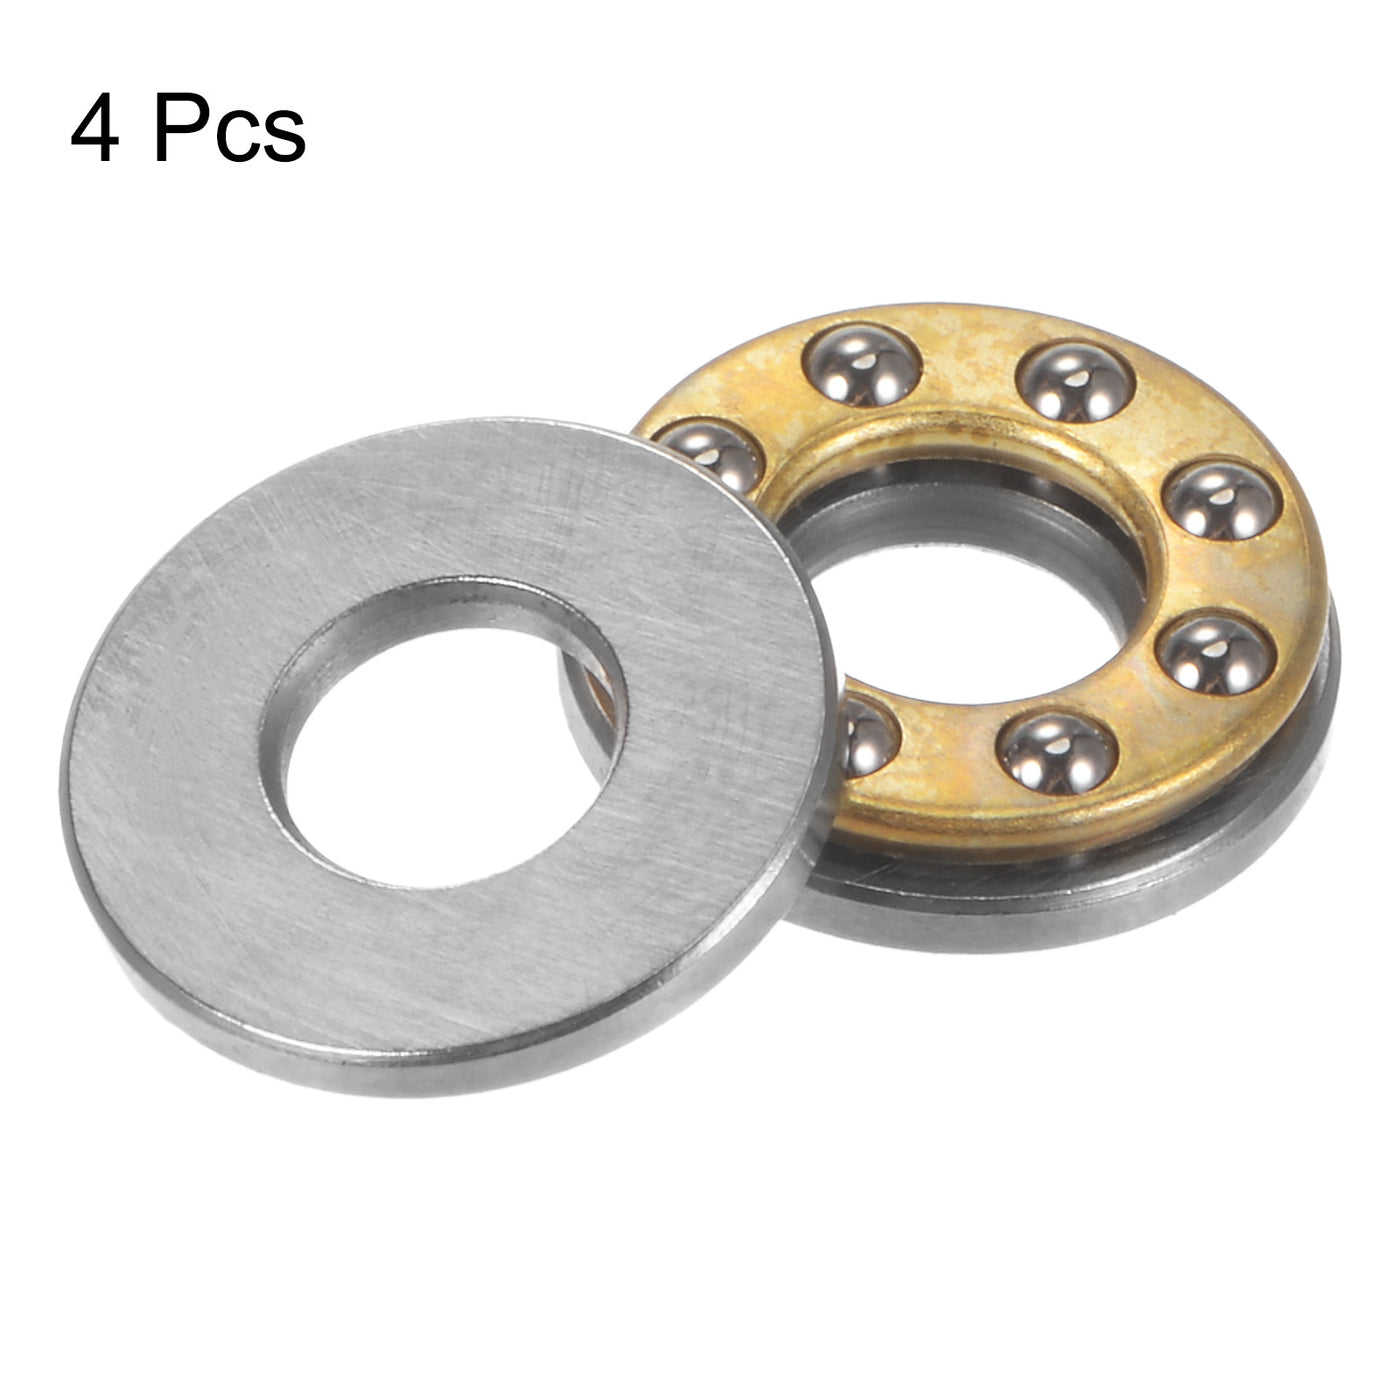 uxcell Uxcell F6-14M Thrust Ball Bearing 6x14x5mm Brass with Washers ABEC3 4pcs